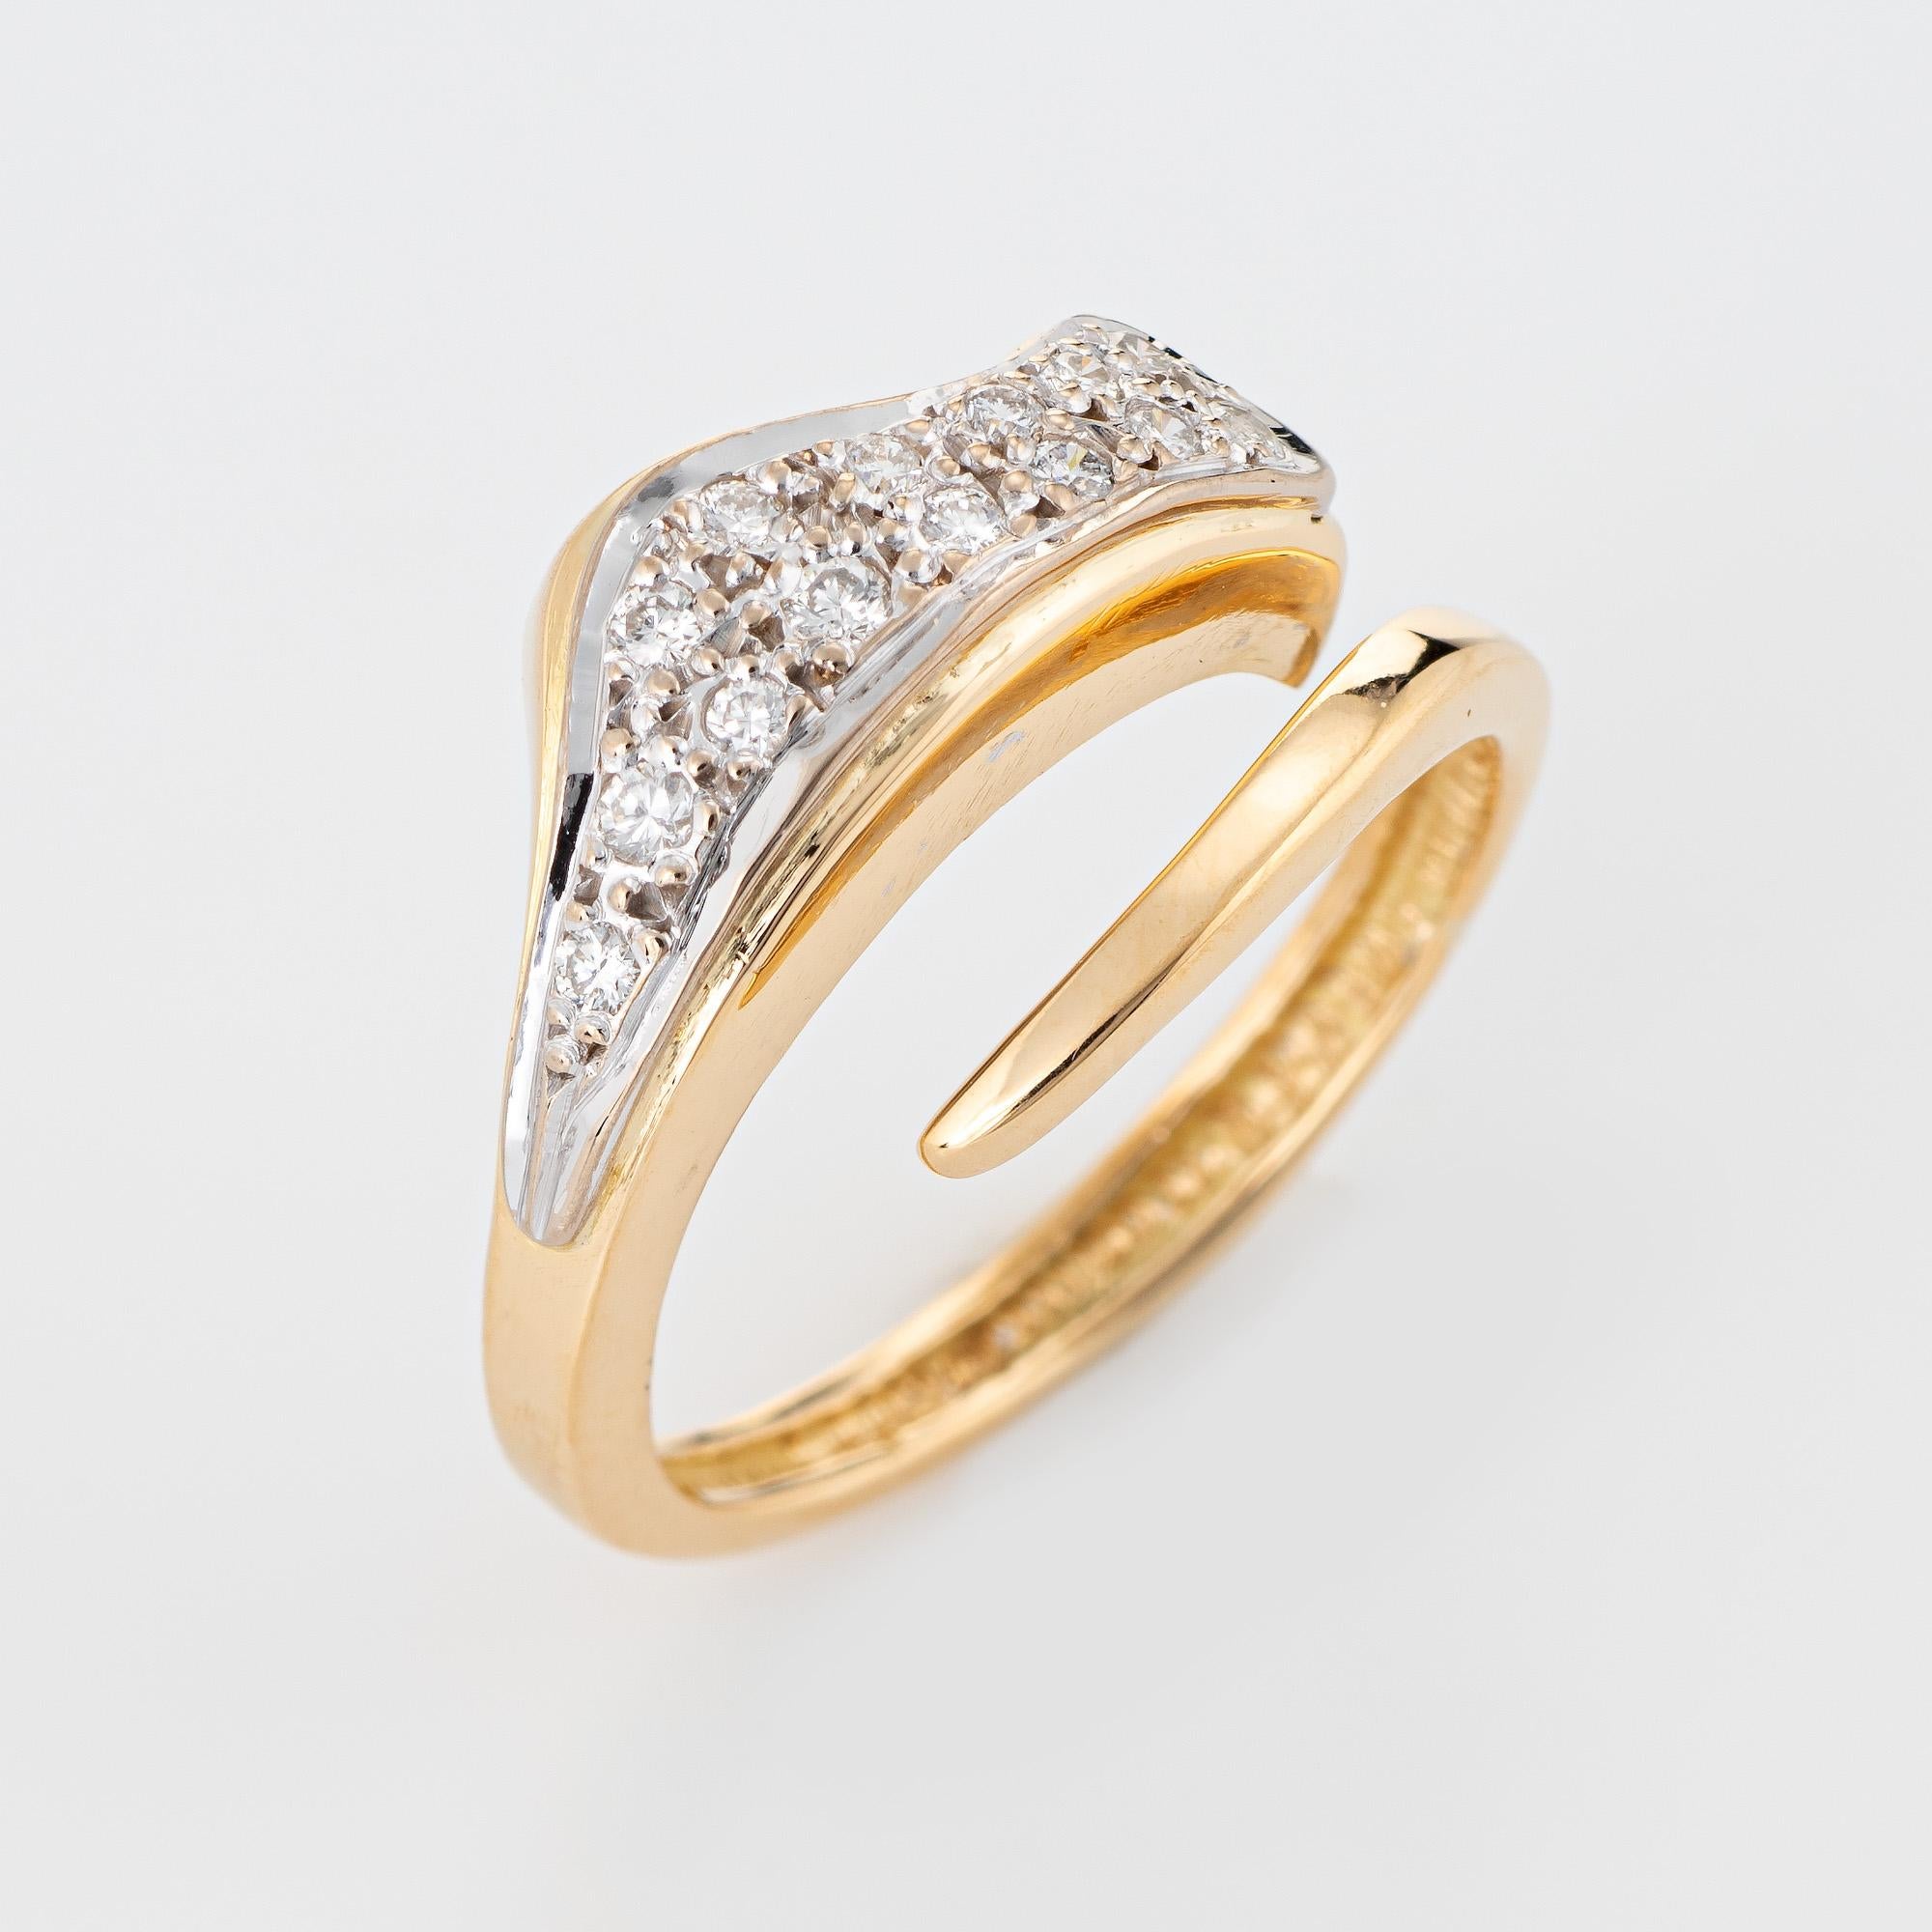 Stylish Ilias Lalaounis diamond band crafted in 18 karat yellow gold. 

Diamonds total an estimated 0.28 carats (estimated at H-I color and VS2-SI1 clarity). 

The stylish band features a bypass undulating design by the famed Greek designer Ilias